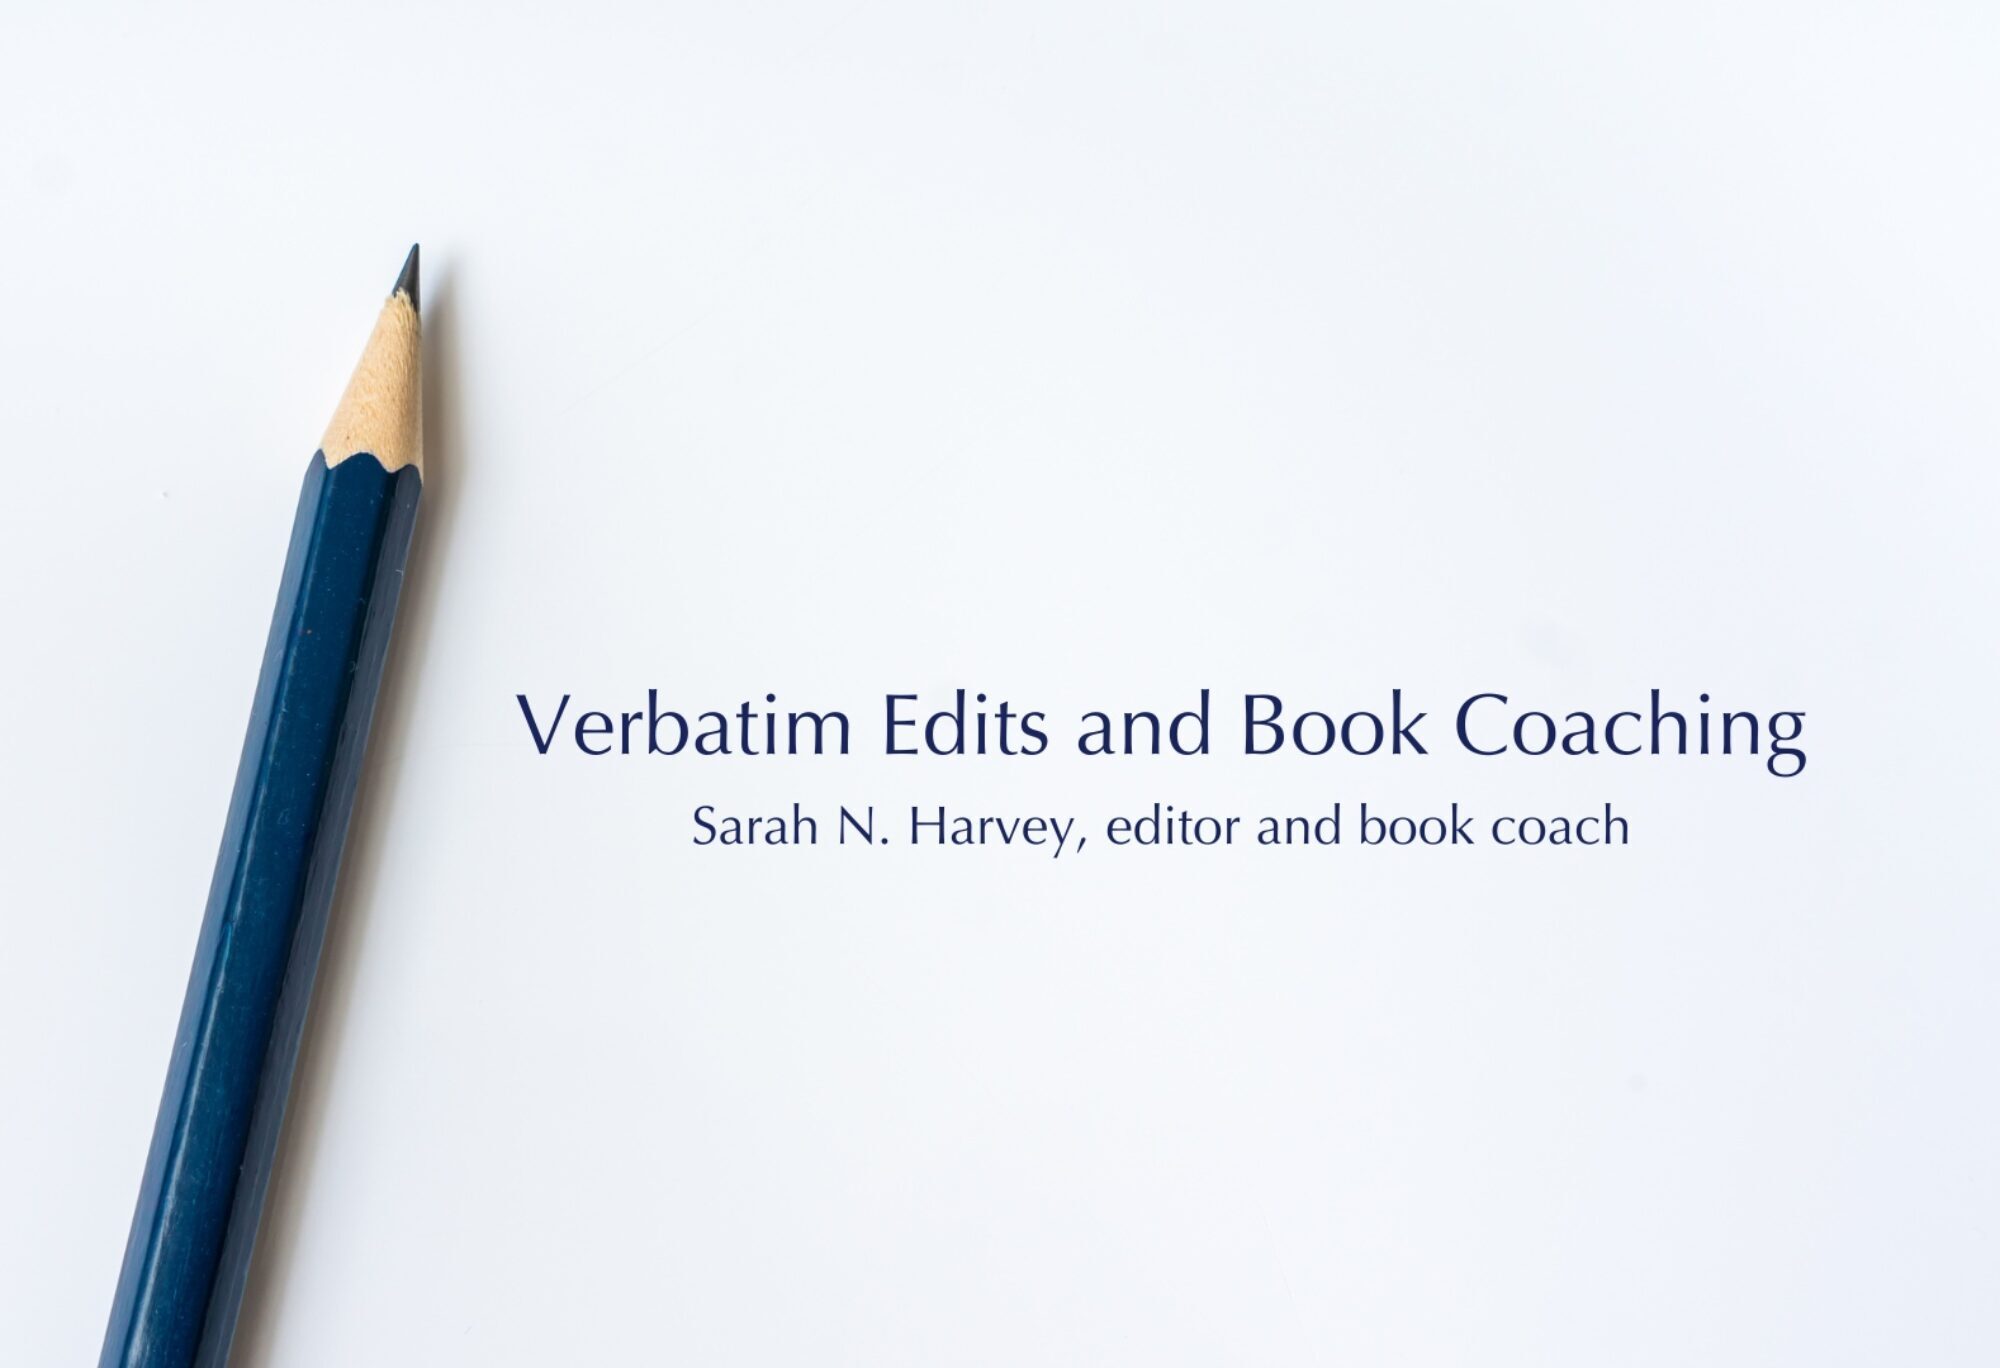 One blue sharpened pencil with the company's name, Verbatim Edits and the editor, Sarah N. Harvey